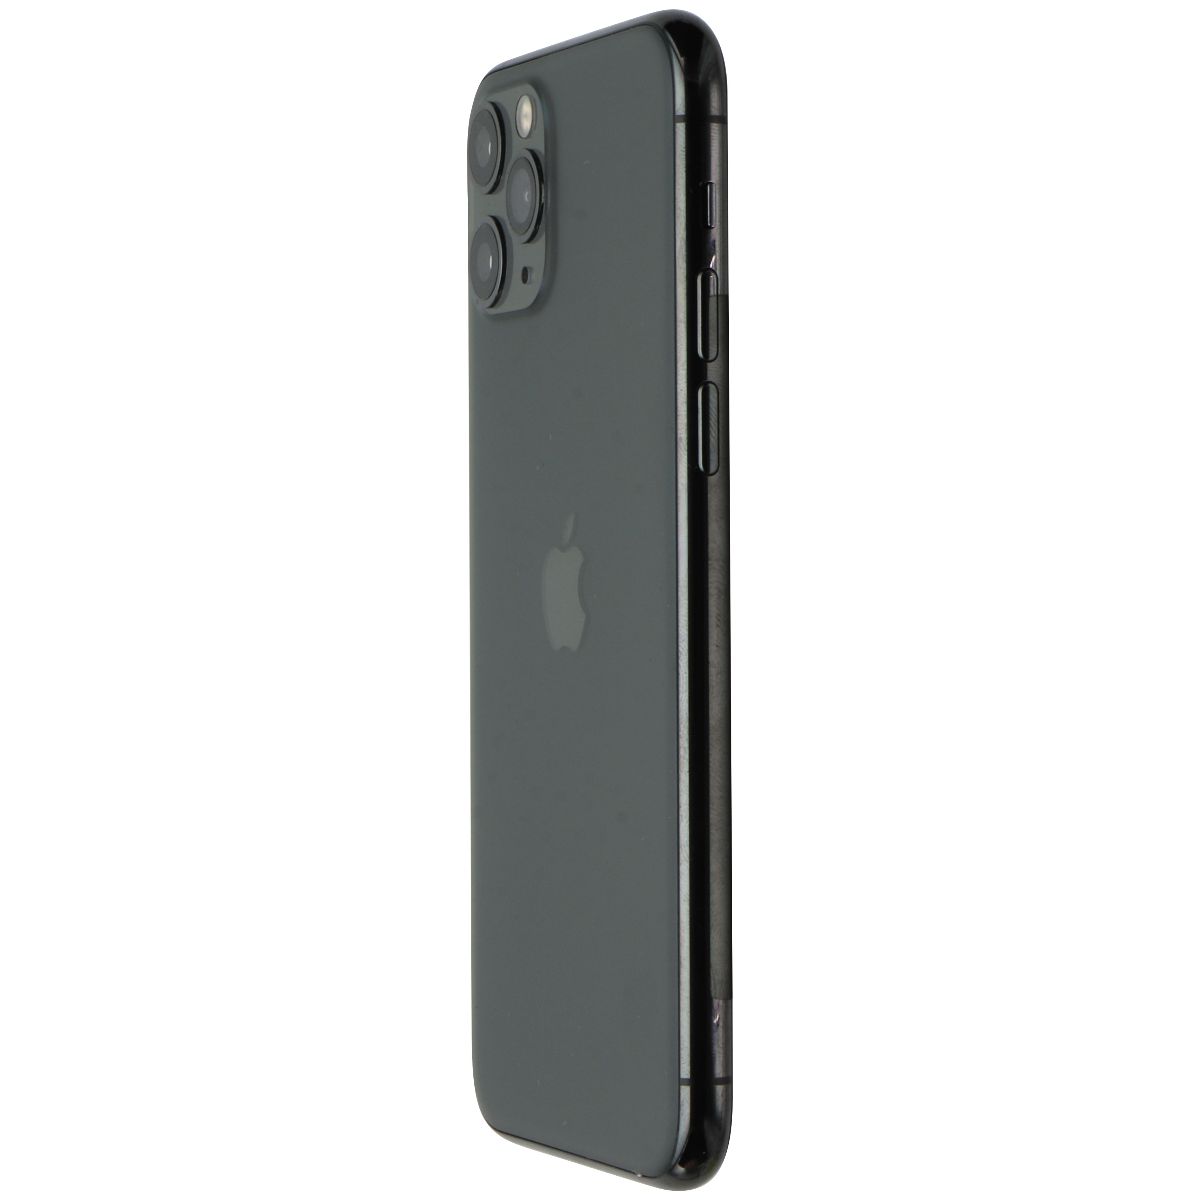 Apple iPhone 11 Pro (5.8-in) Smartphone A2160 (Verizon Only) - 64GB / Space Gray Cell Phones & Smartphones Apple    - Simple Cell Bulk Wholesale Pricing - USA Seller